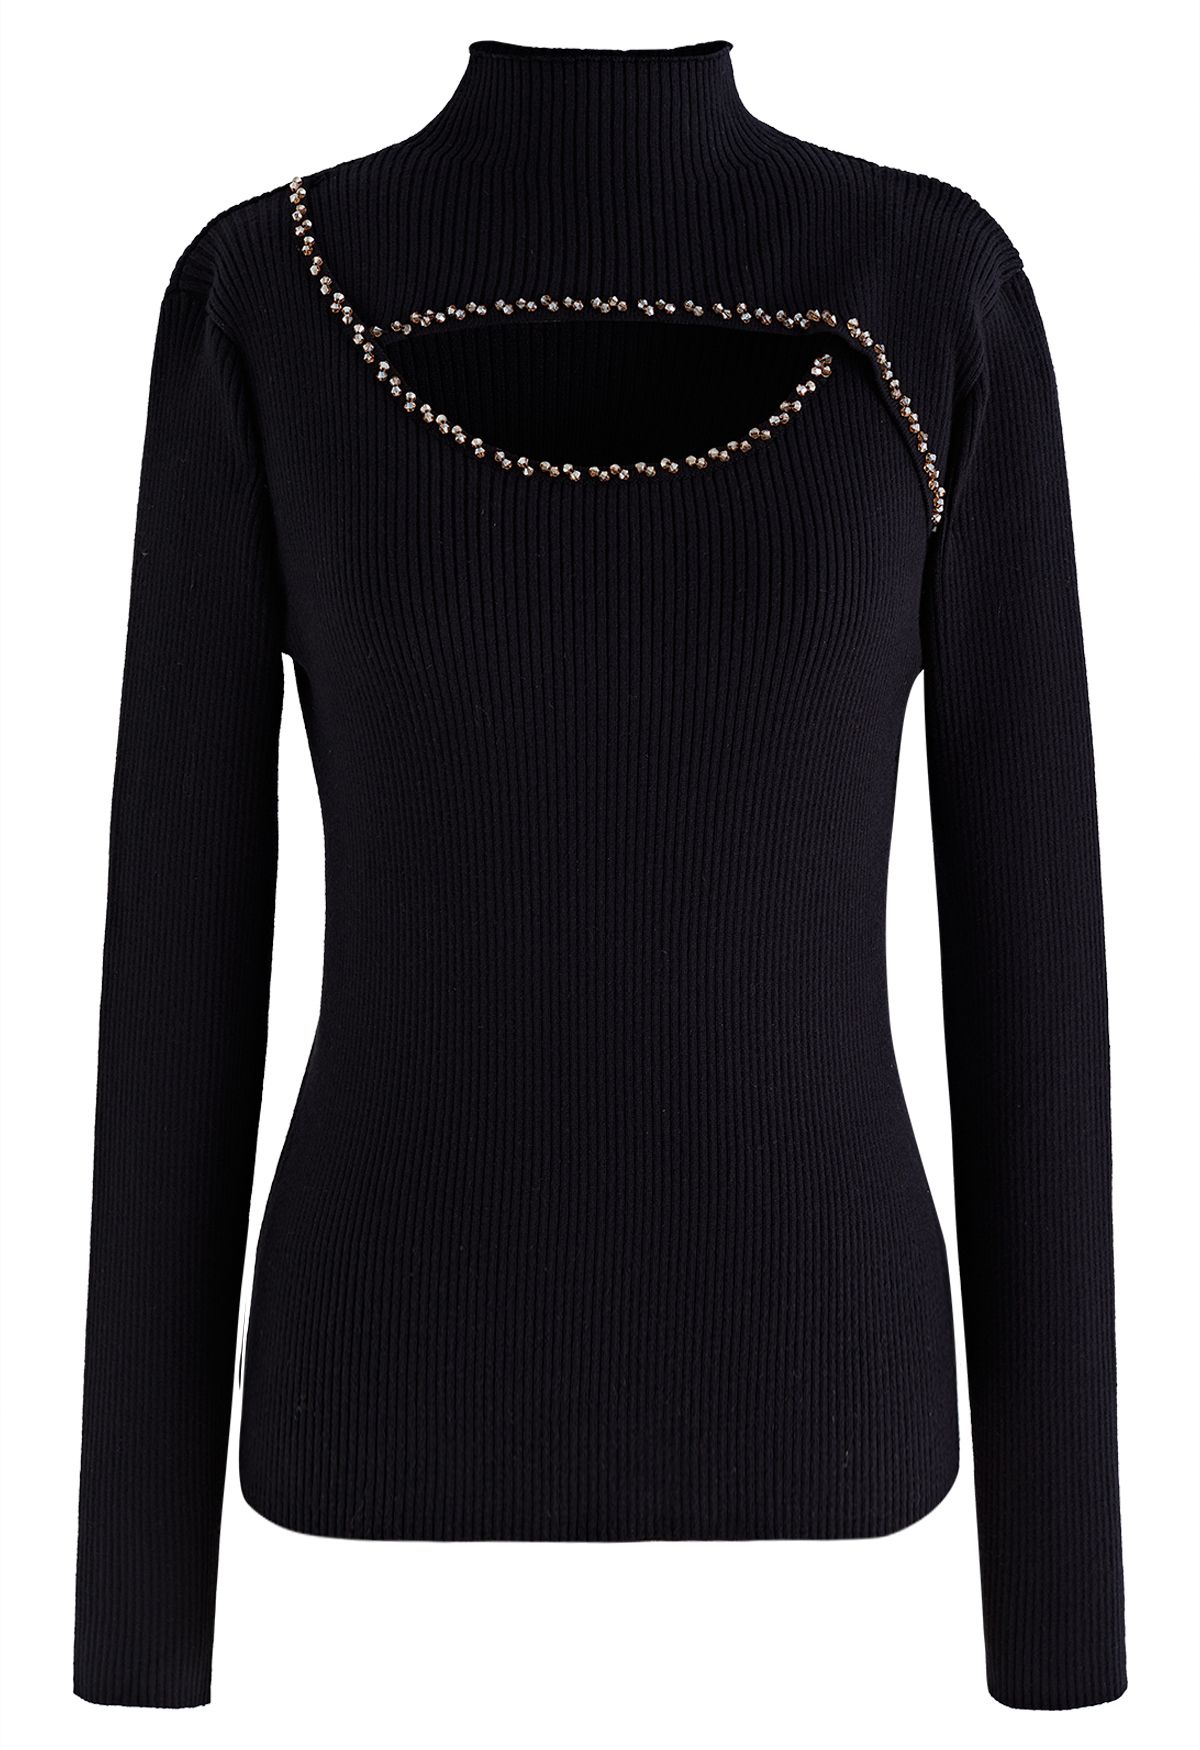 Crystal Trim Cutout High Neck Knit Top in Black - Retro, Indie and ...